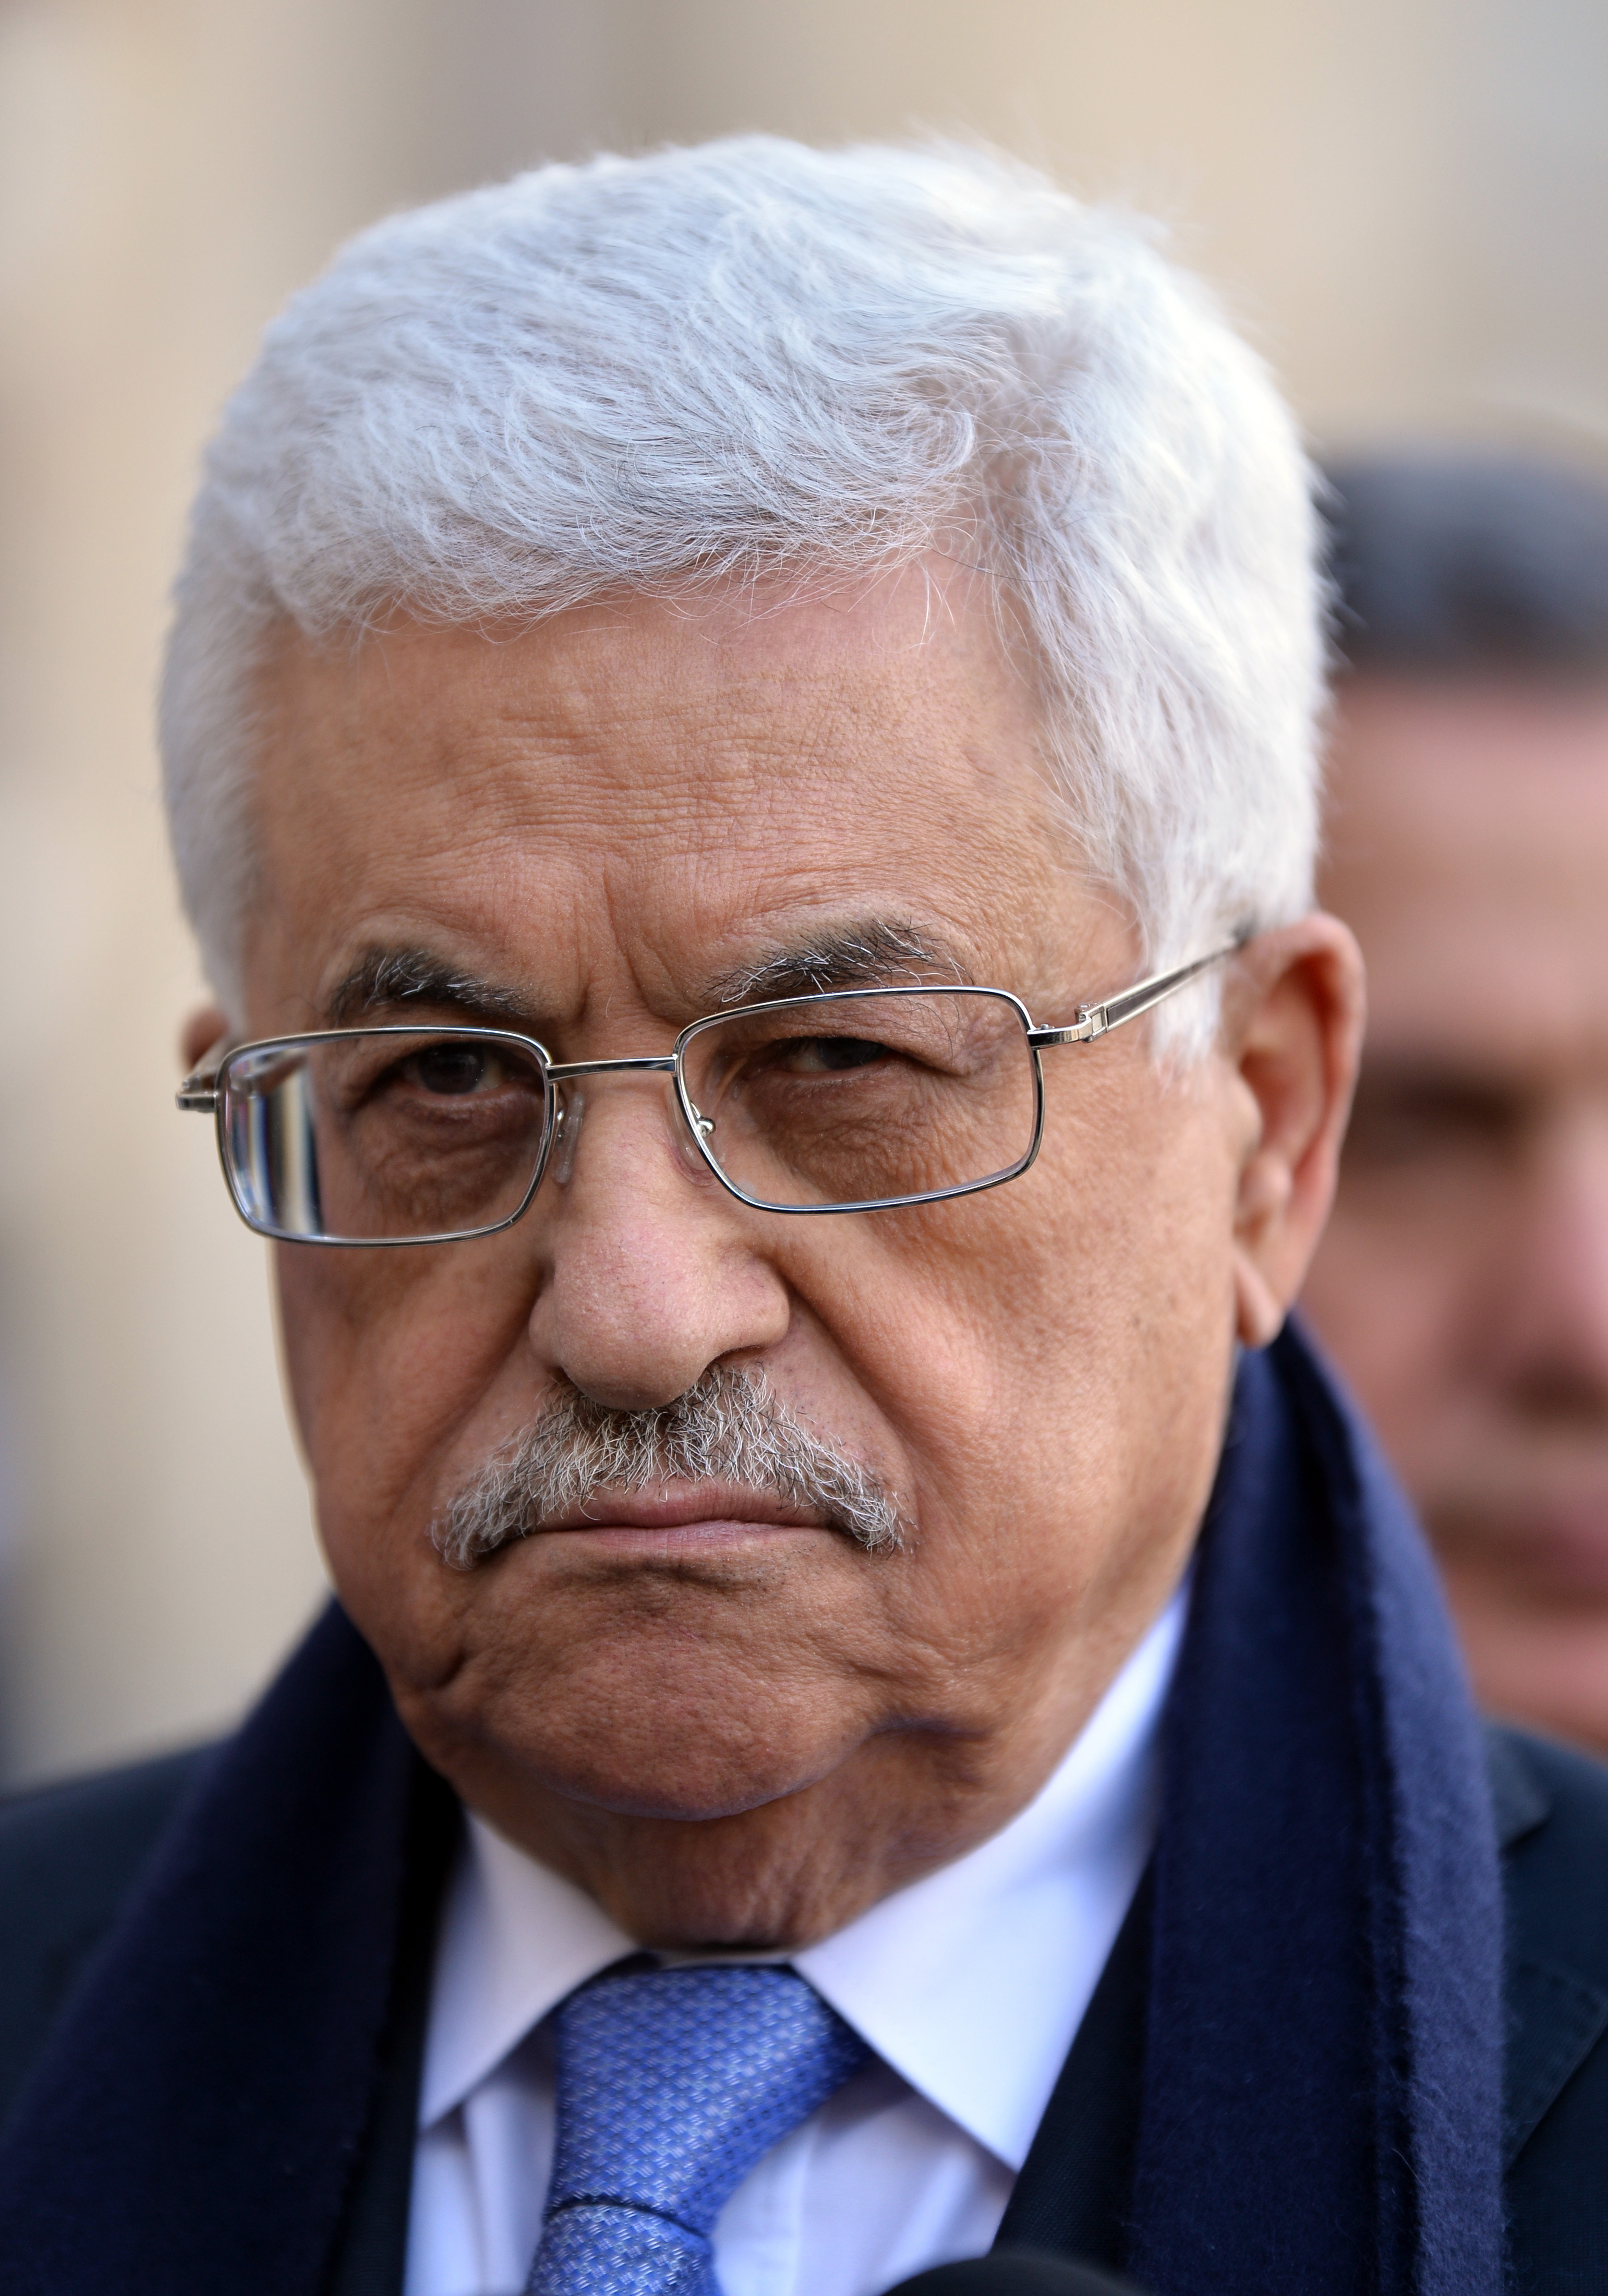 Palestinian Authority President Mahmoud Abbas at the Elysee Palace in Paris, France, on February 21, 2014. (Anadolu Agency&mdash;Getty Images)